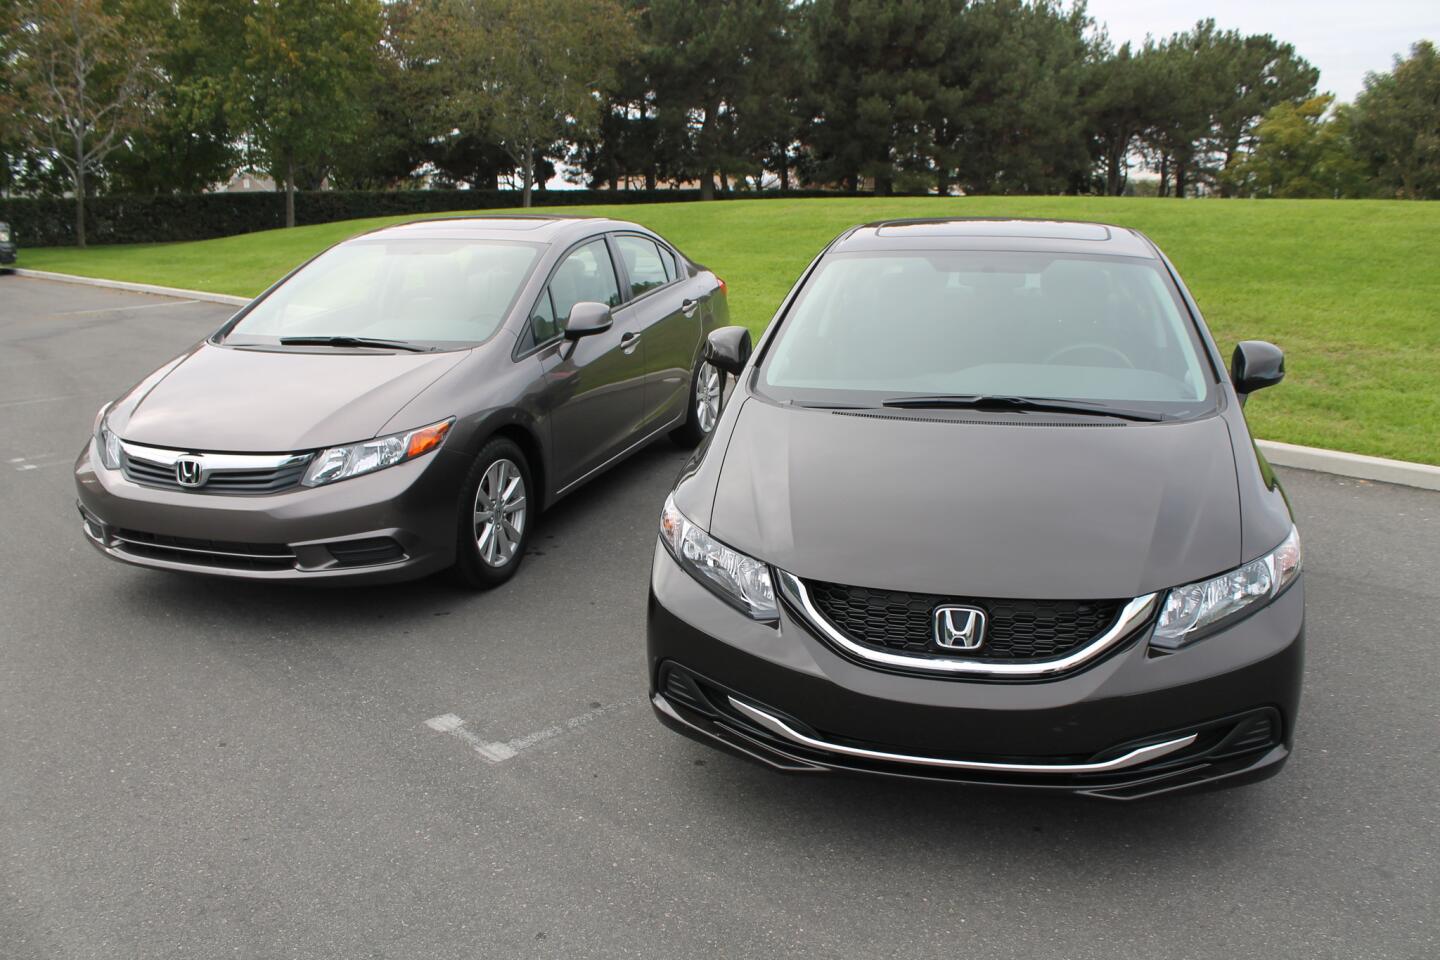 The 2012 Honda Civic, left, is next to the updated 2013 version at Honda's U.S. headquarters in Torrance.